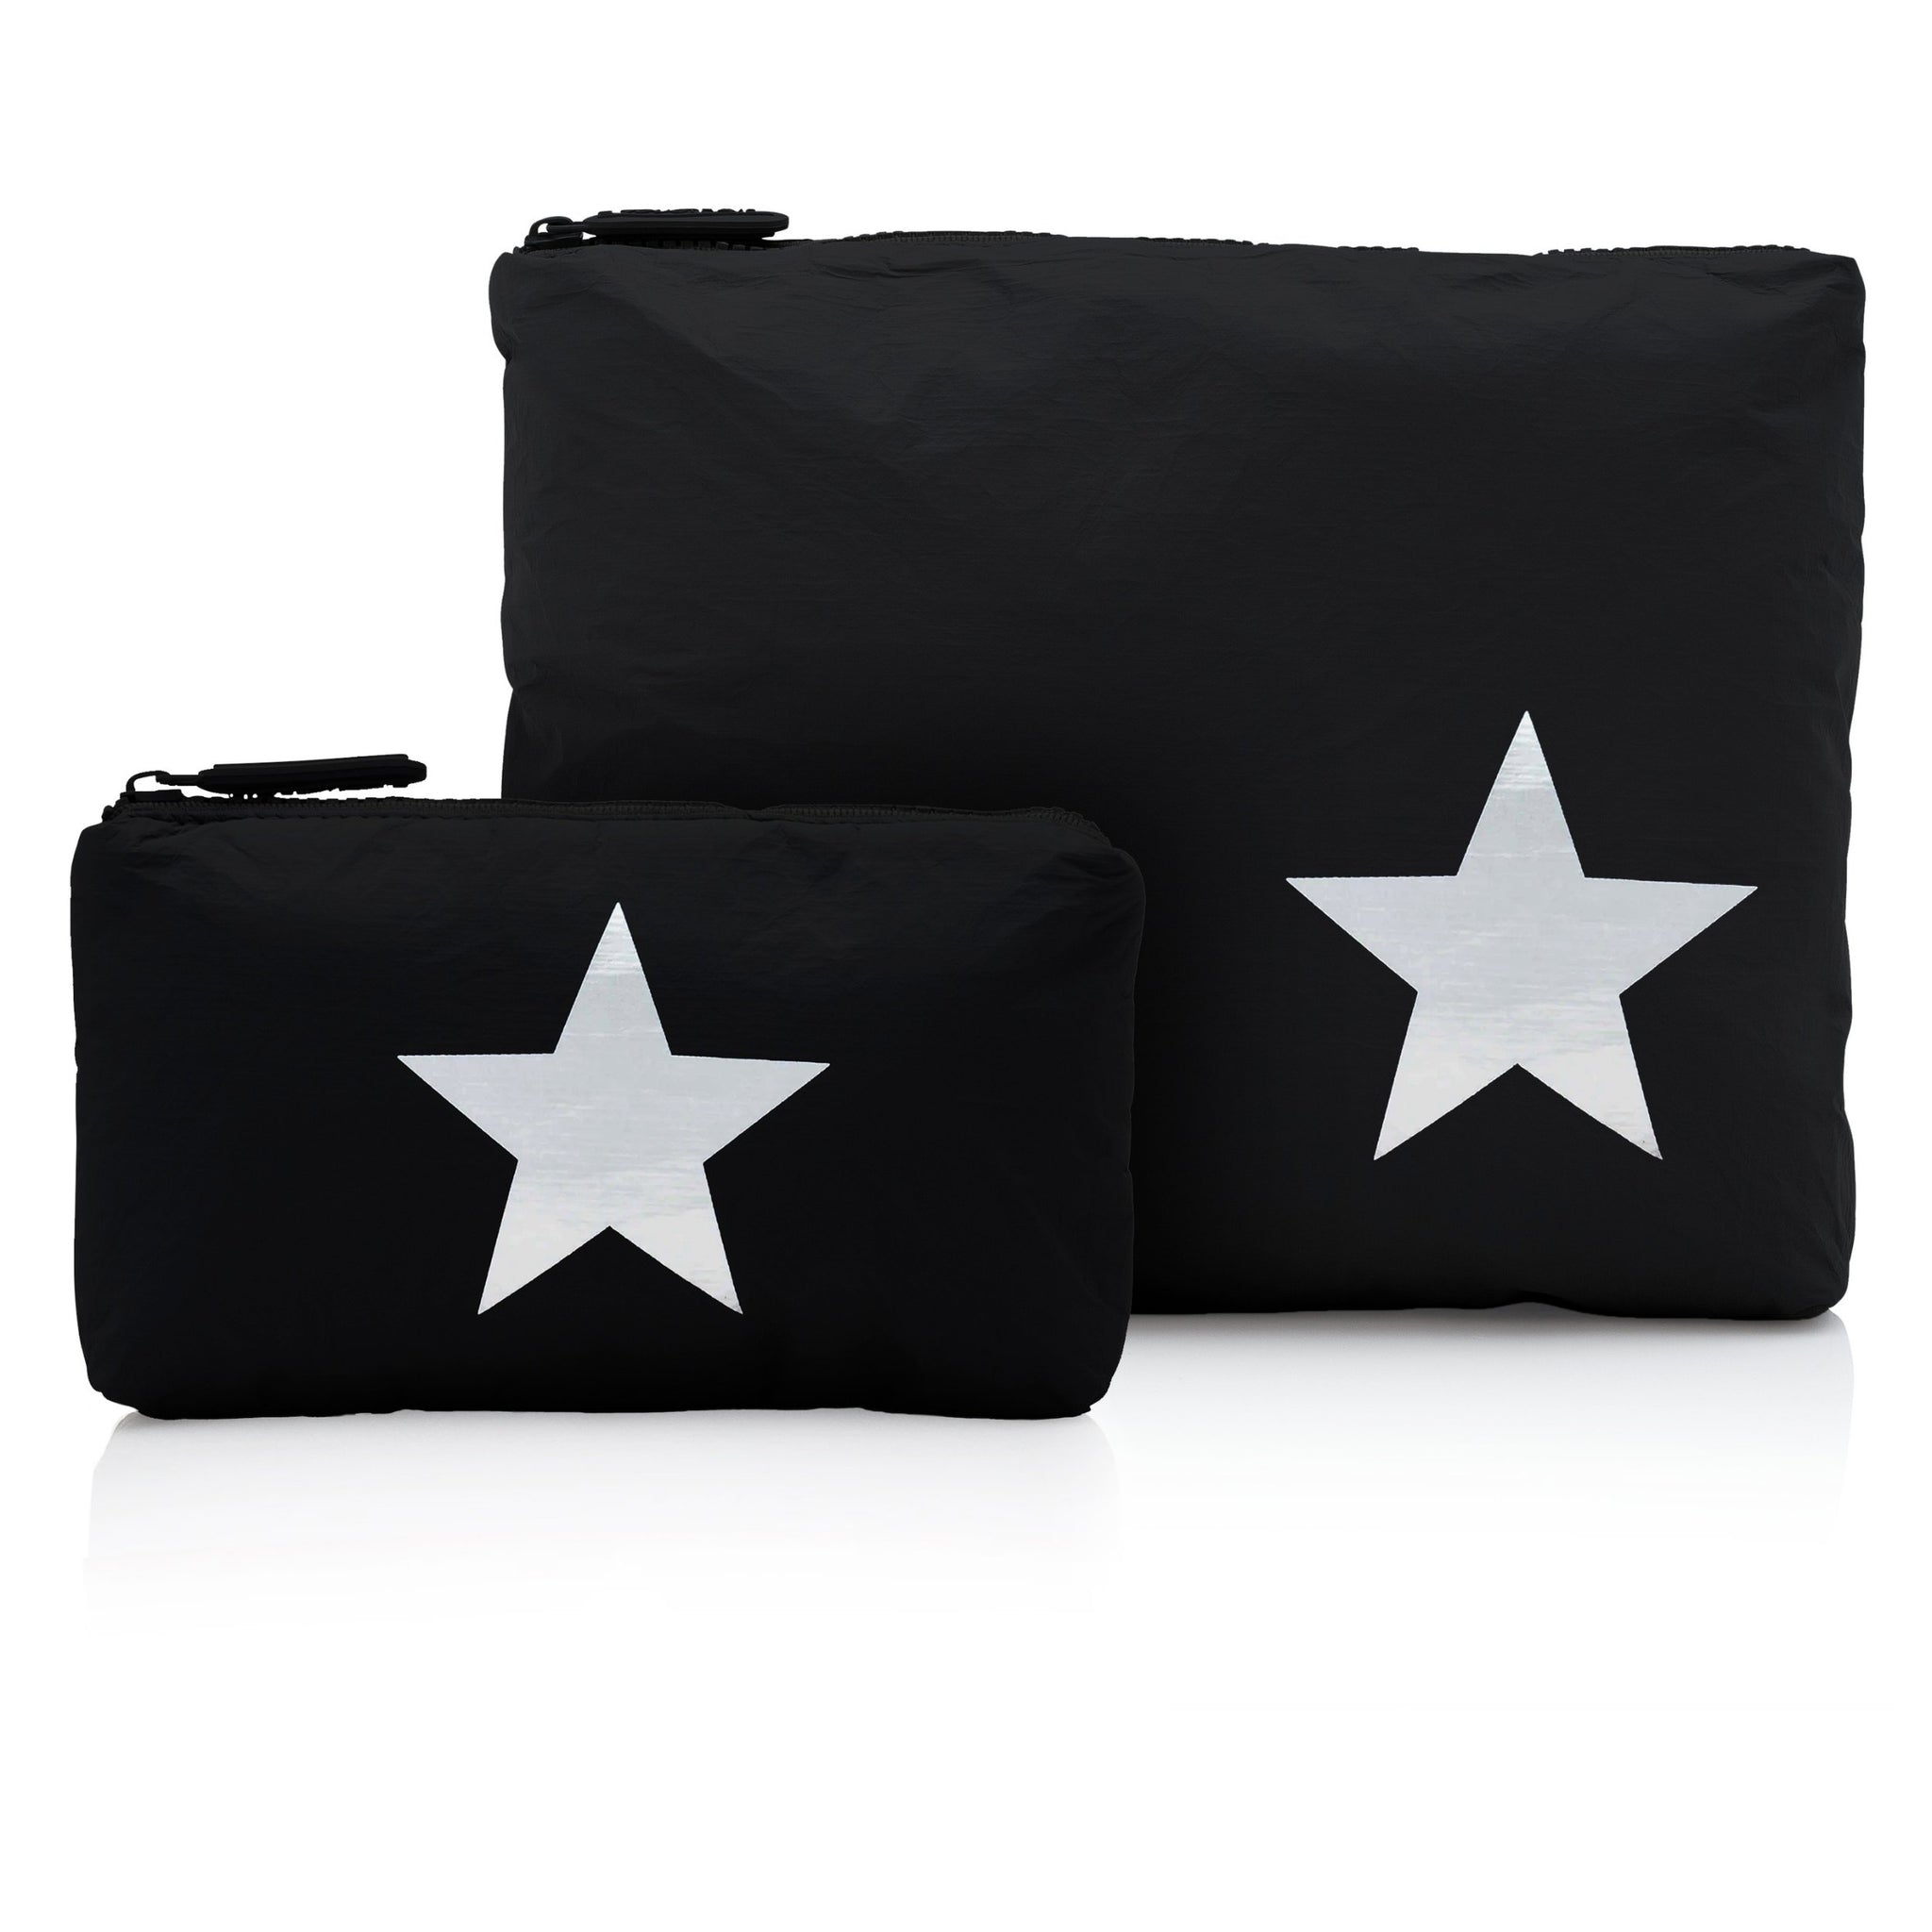 Set of Two - Organizational Packs - Black with Silver Star